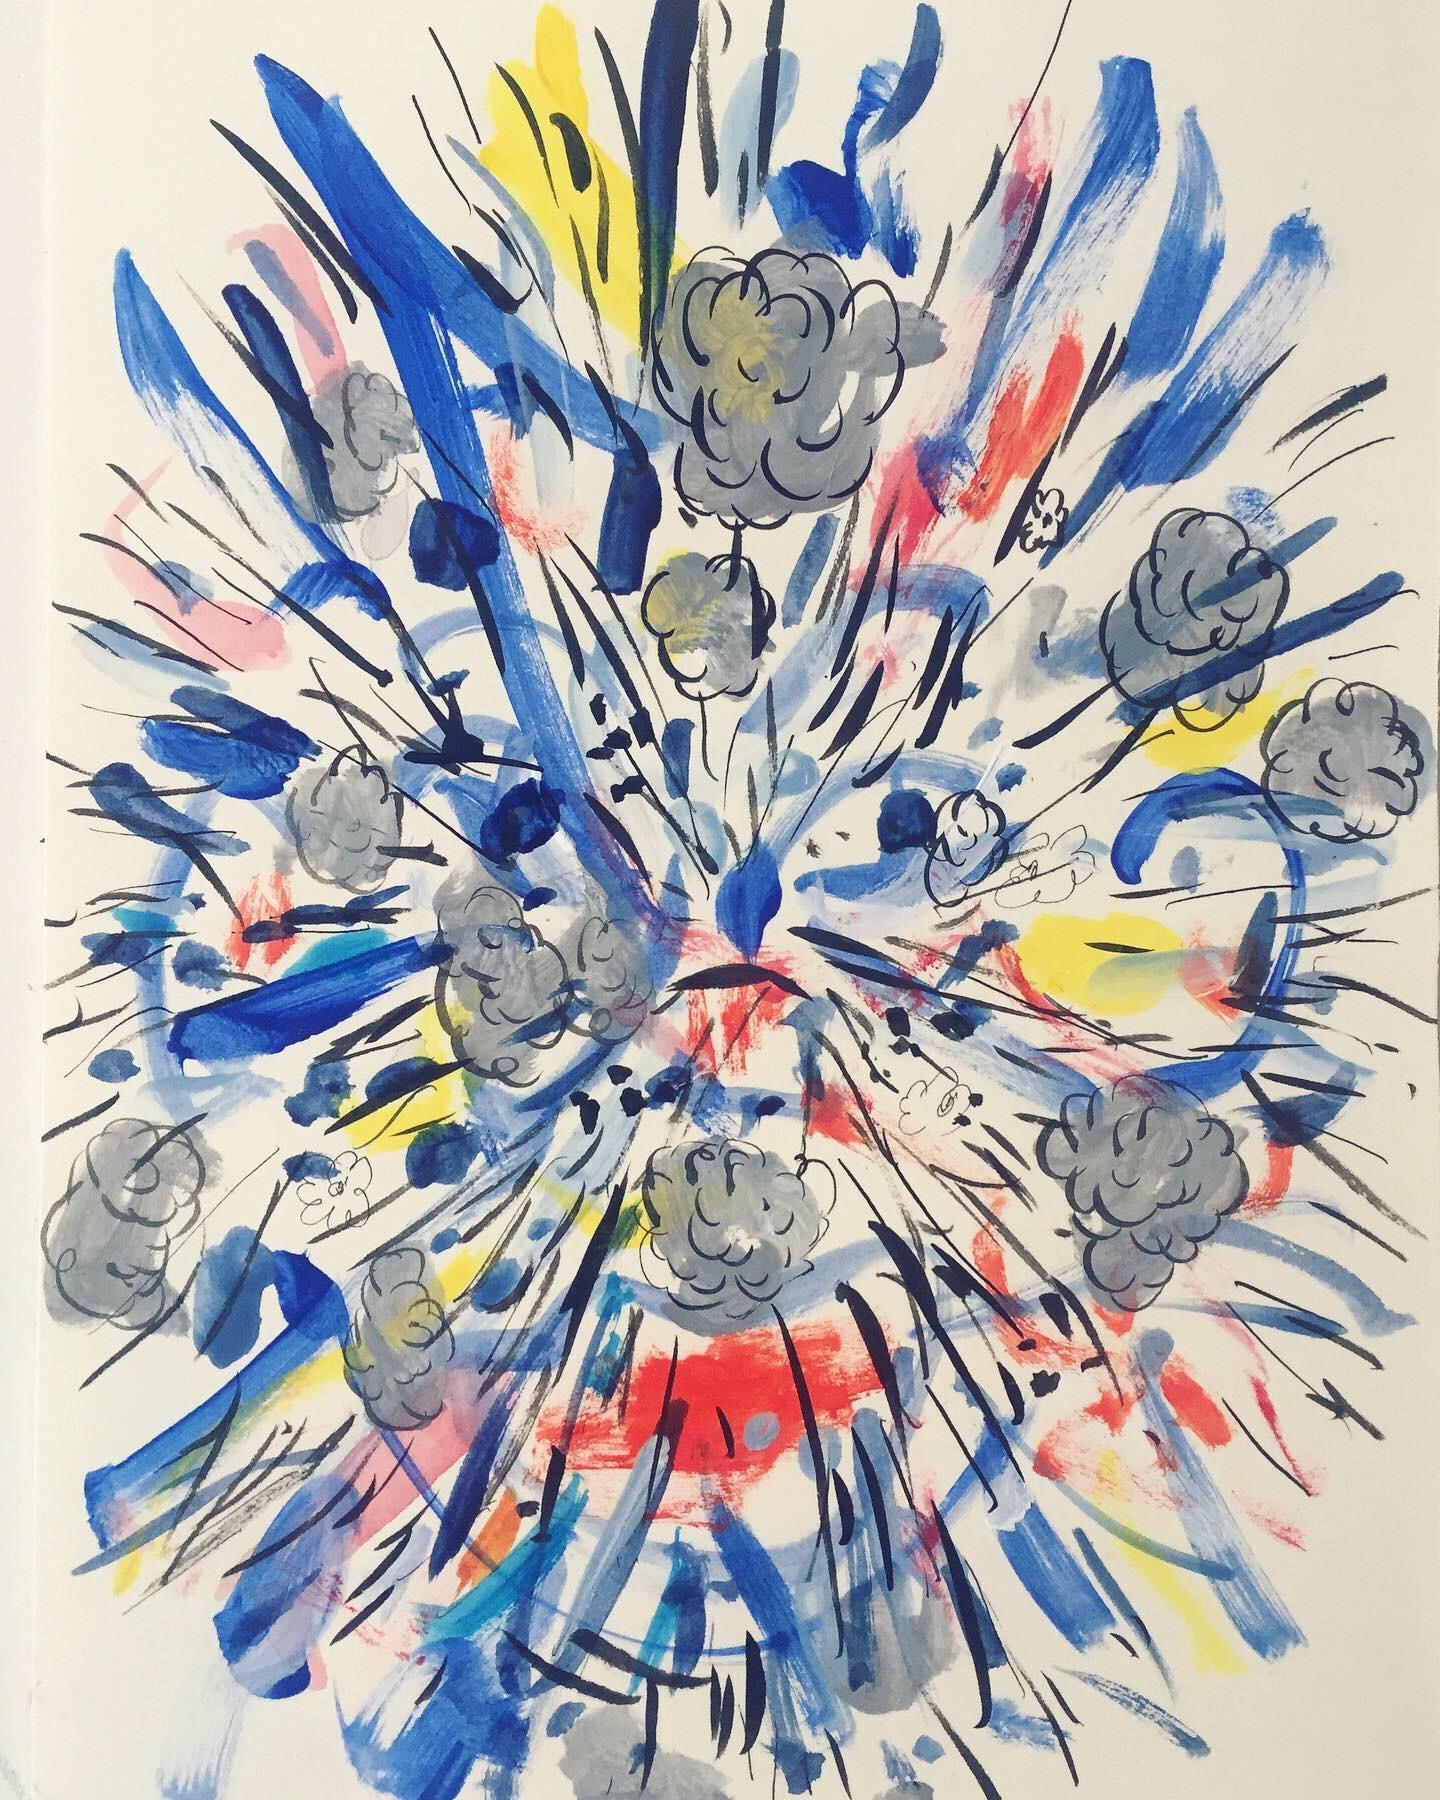 Nina Bovasso Portrait - Face Explosion 2  (2 of 4 suite) 9x12 inches on paper